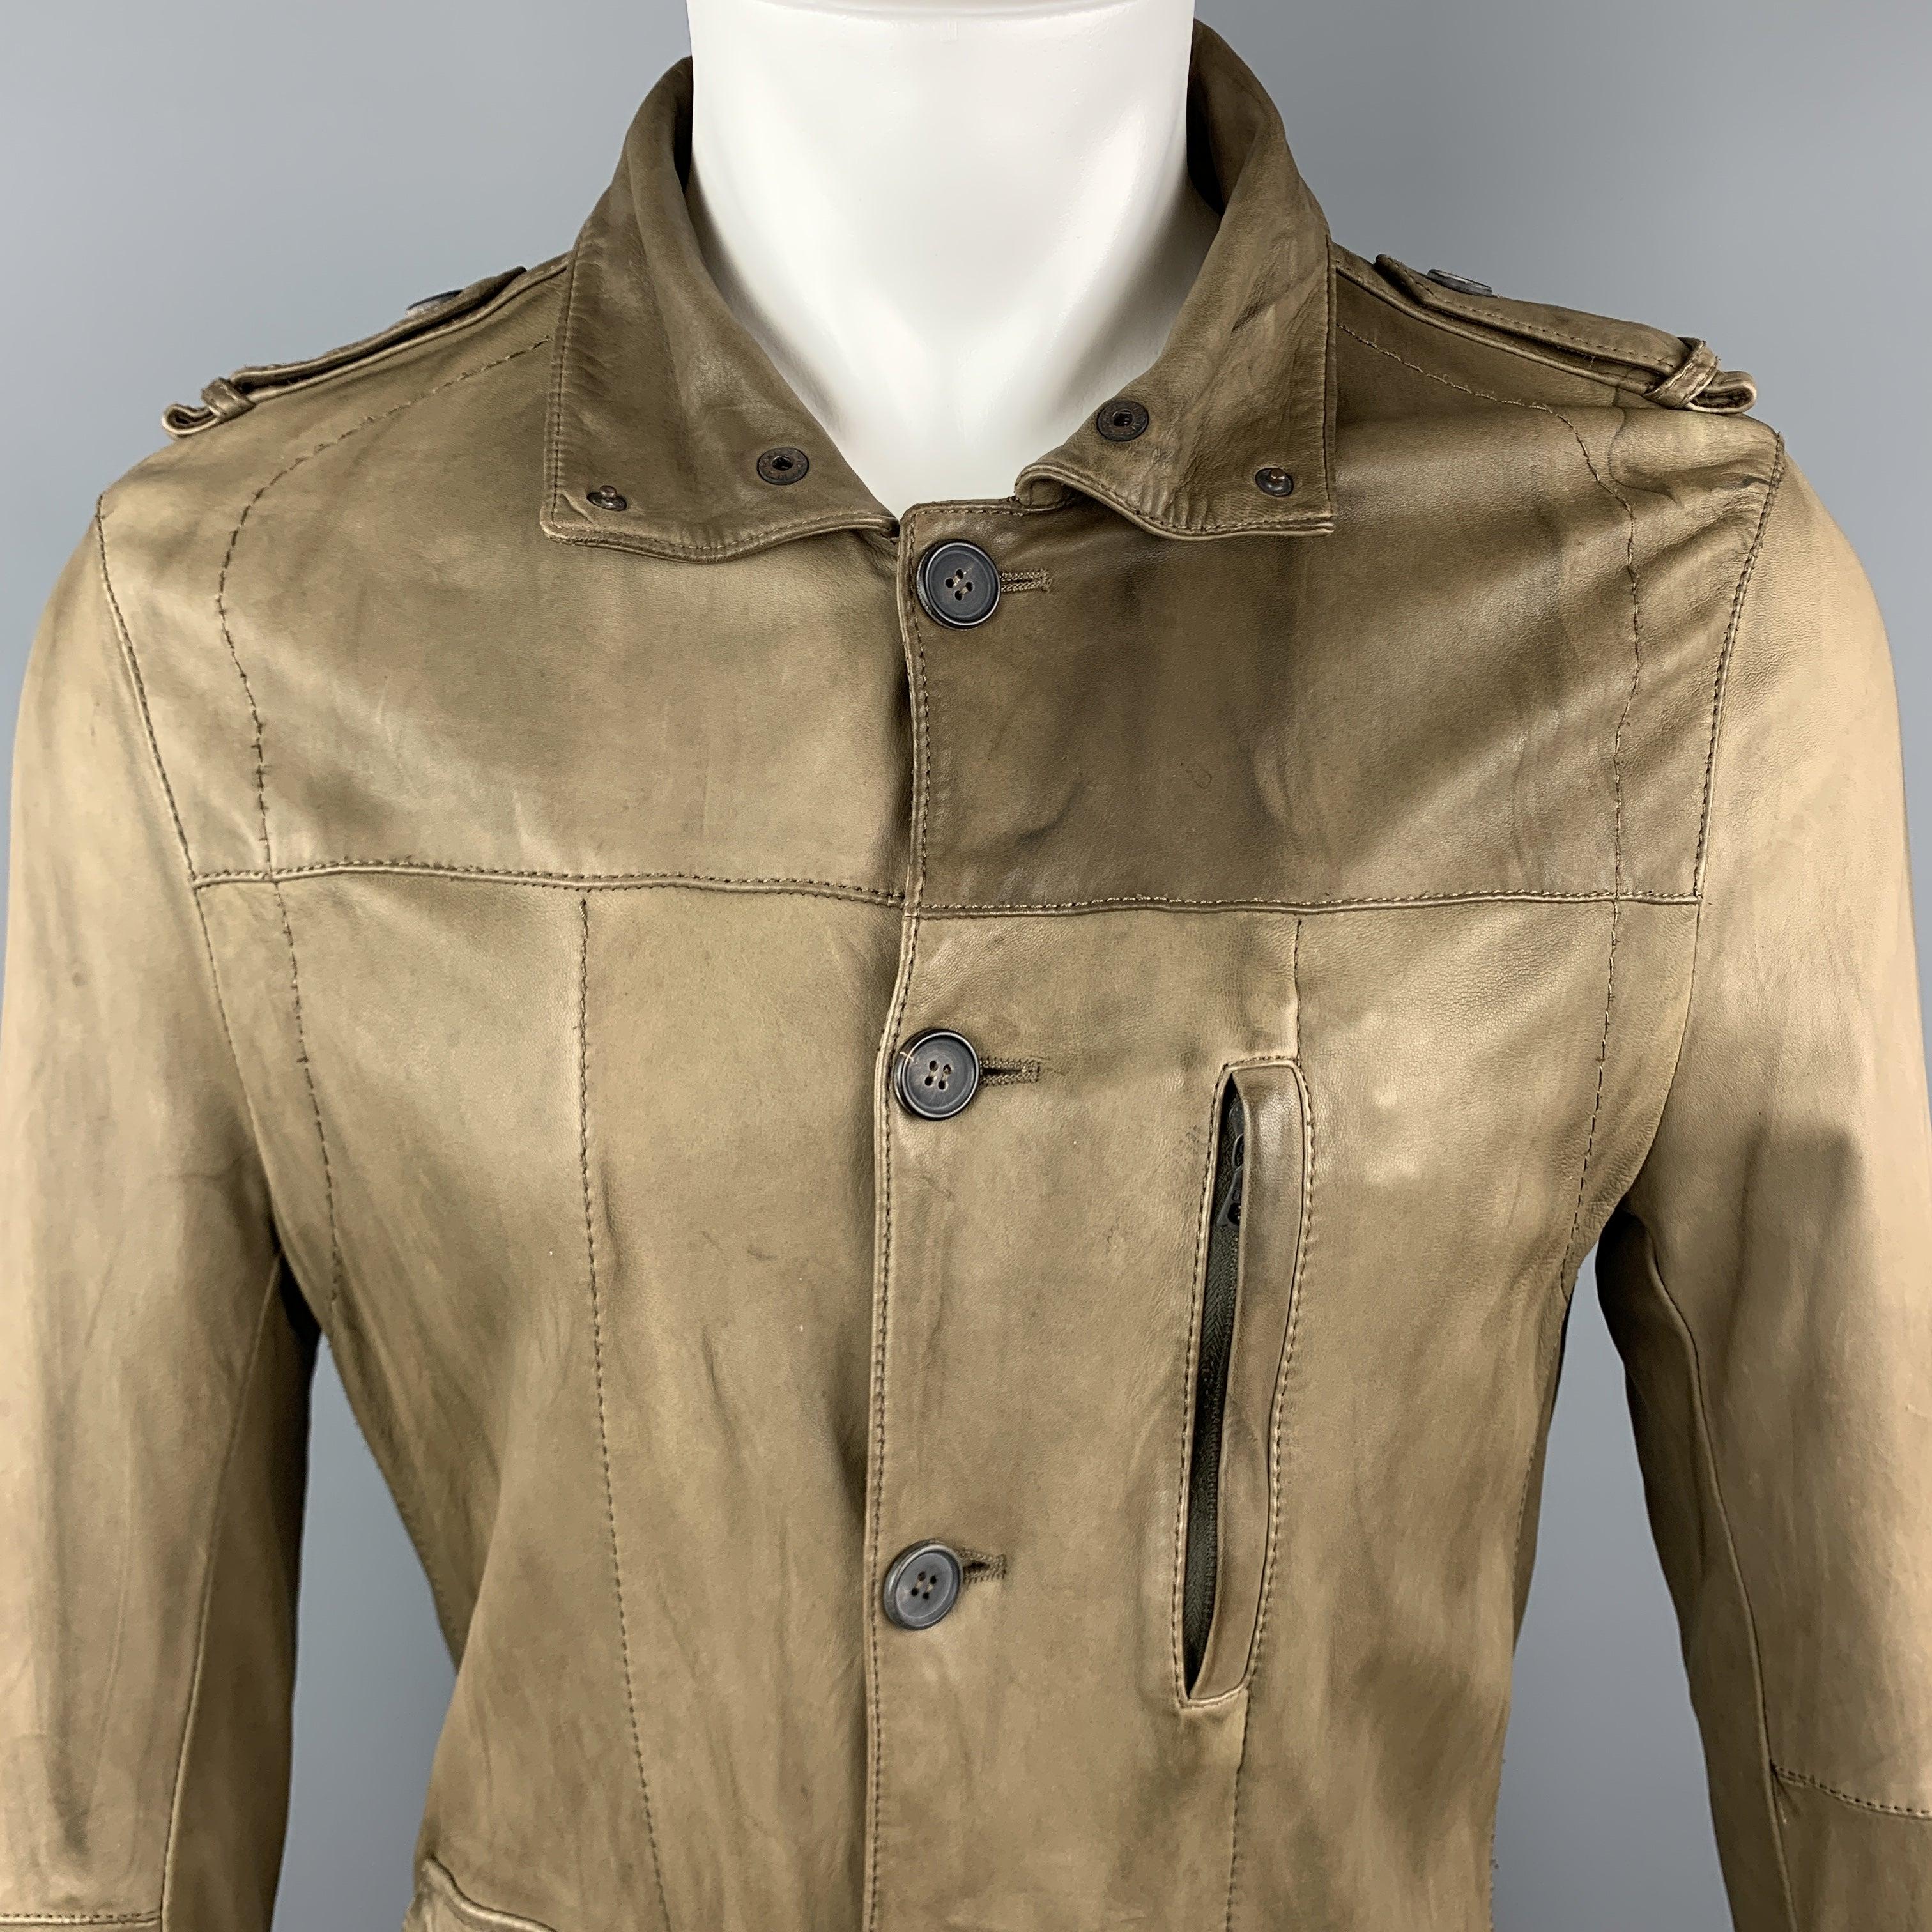 NEIL BARET jacket comes in light weight taupe leather with a folded snap collar, button up front, flap and zip pockets, epaulets, and top stitching. Wear throughout. Made in Italy.Good
Pre-Owned Condition. 

Marked:    

Measurements: 
 
Shoulder: